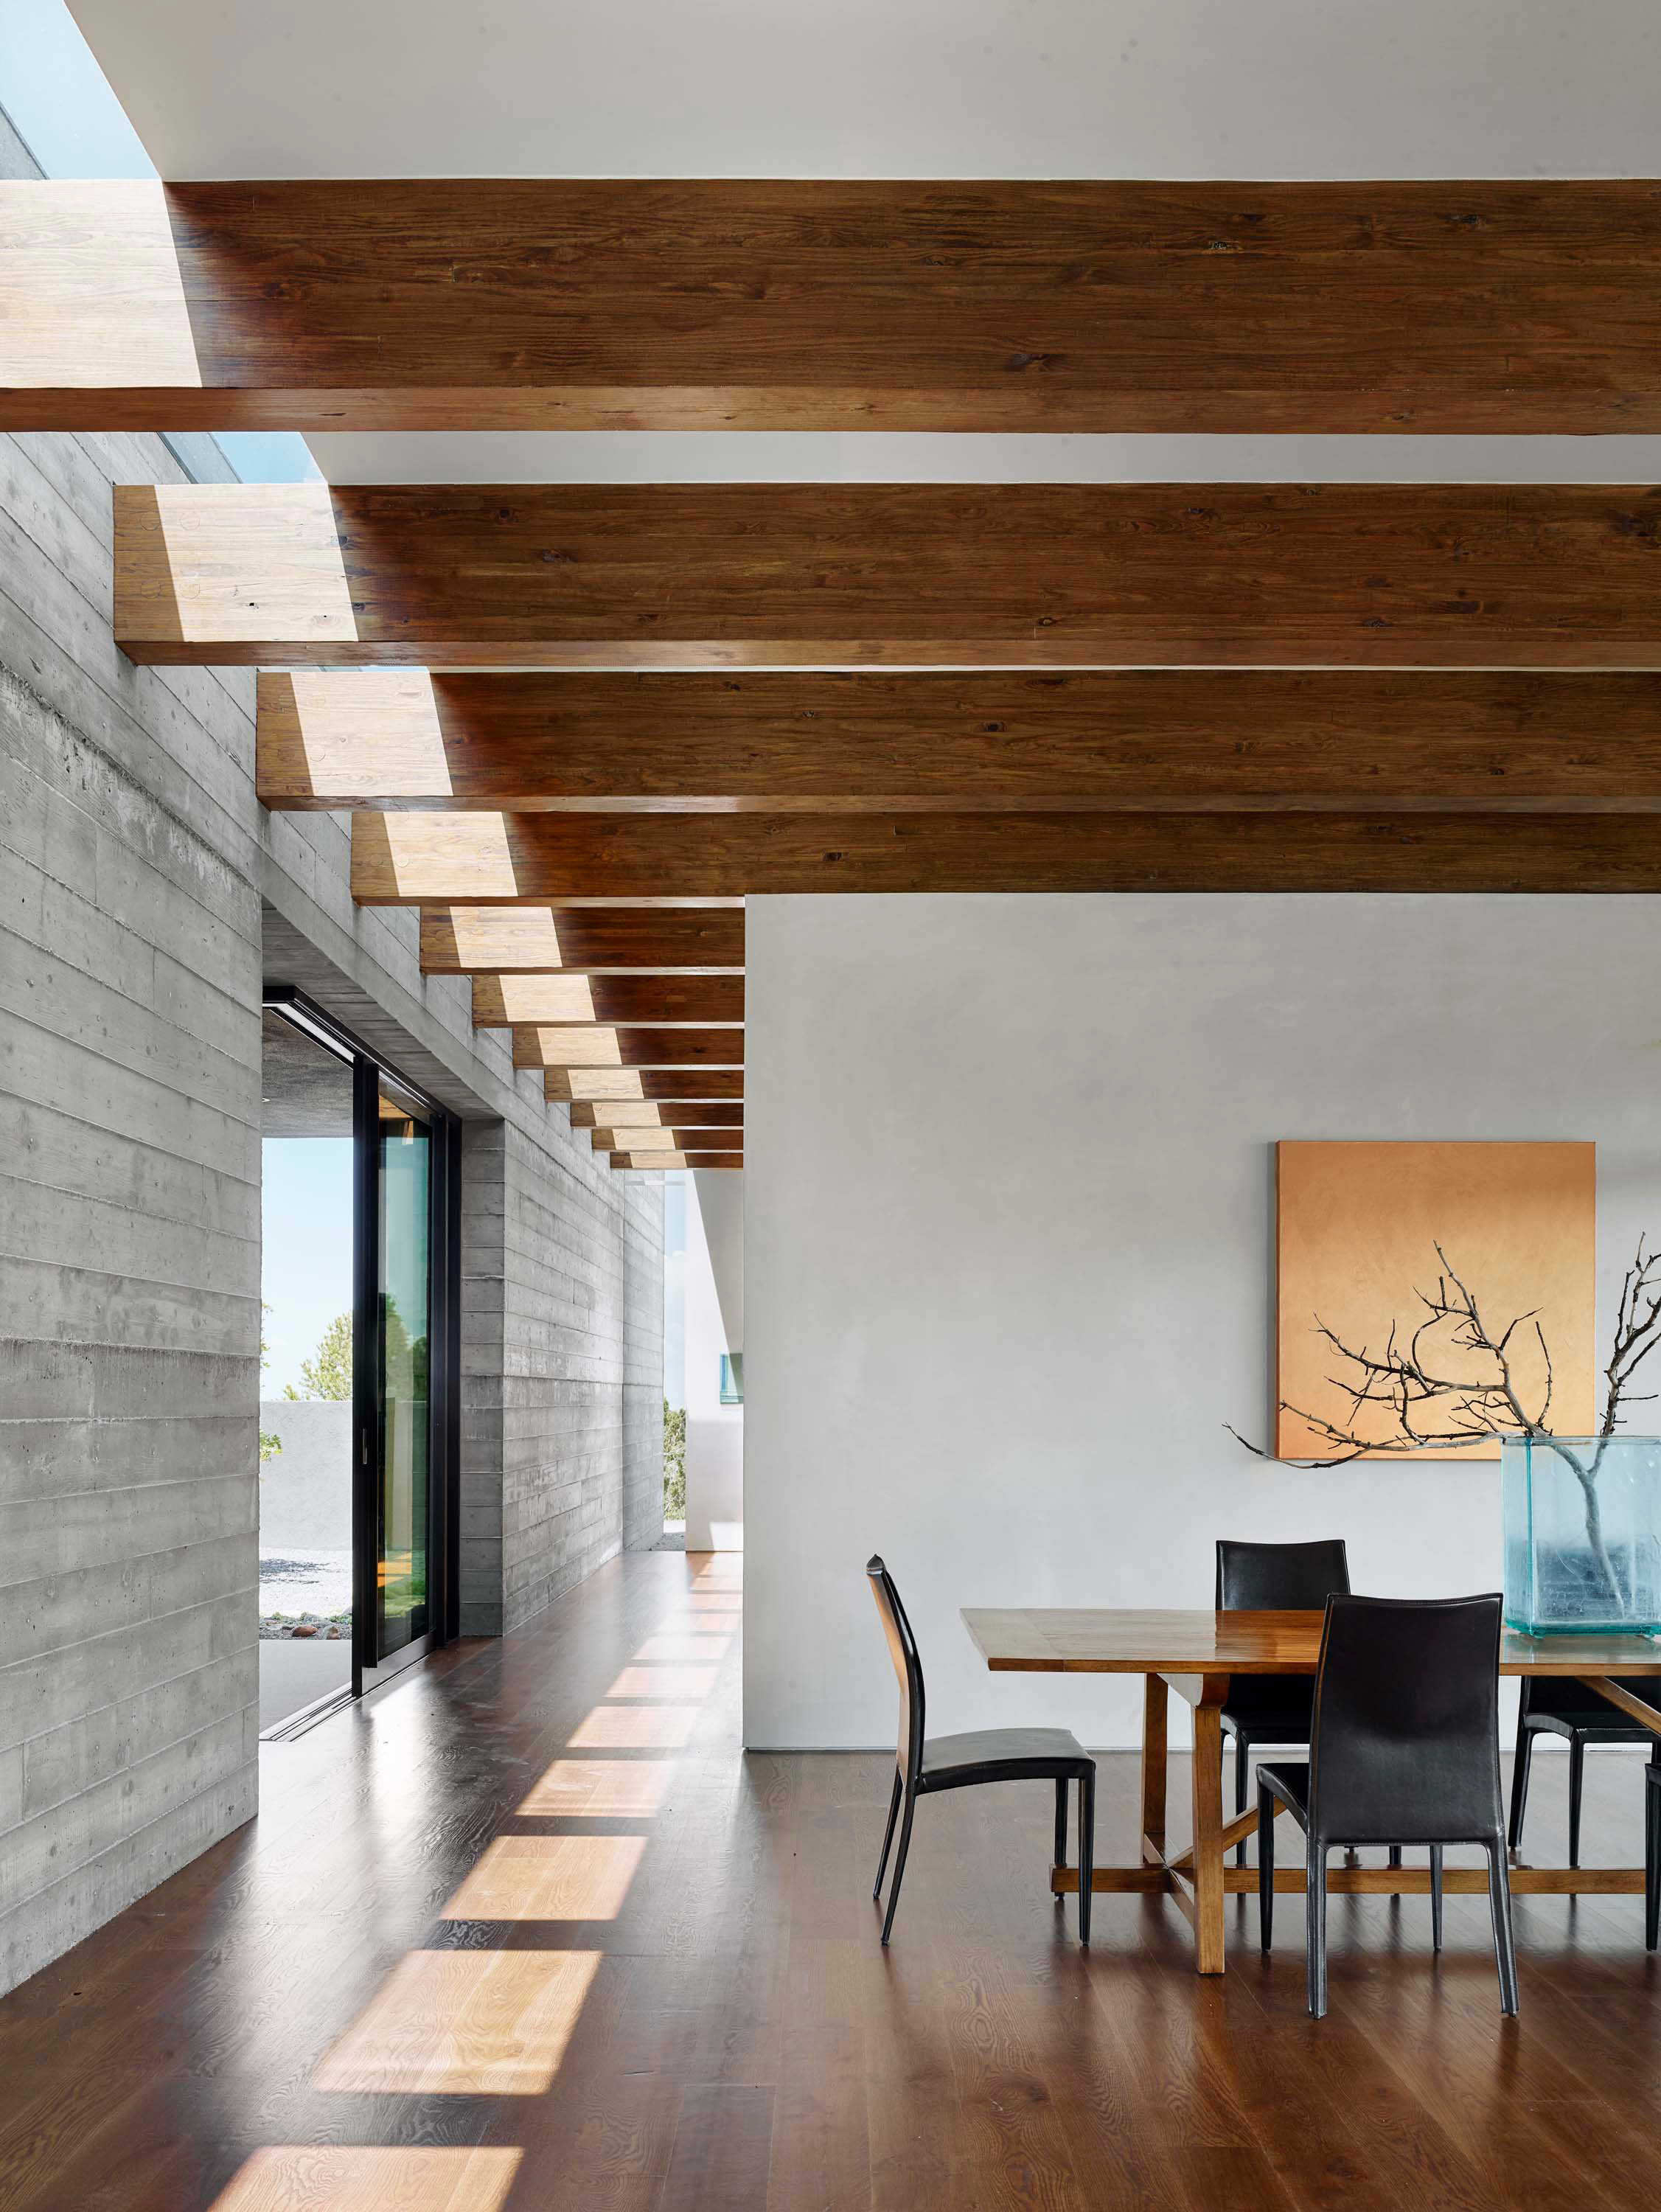 Interior photo of the Sangre de Cristo House by Specht Novak Architects. Shot by Casey Dunn, featuring a dining area with wooden floors, beamed ceilings, and longitudinal hallway.